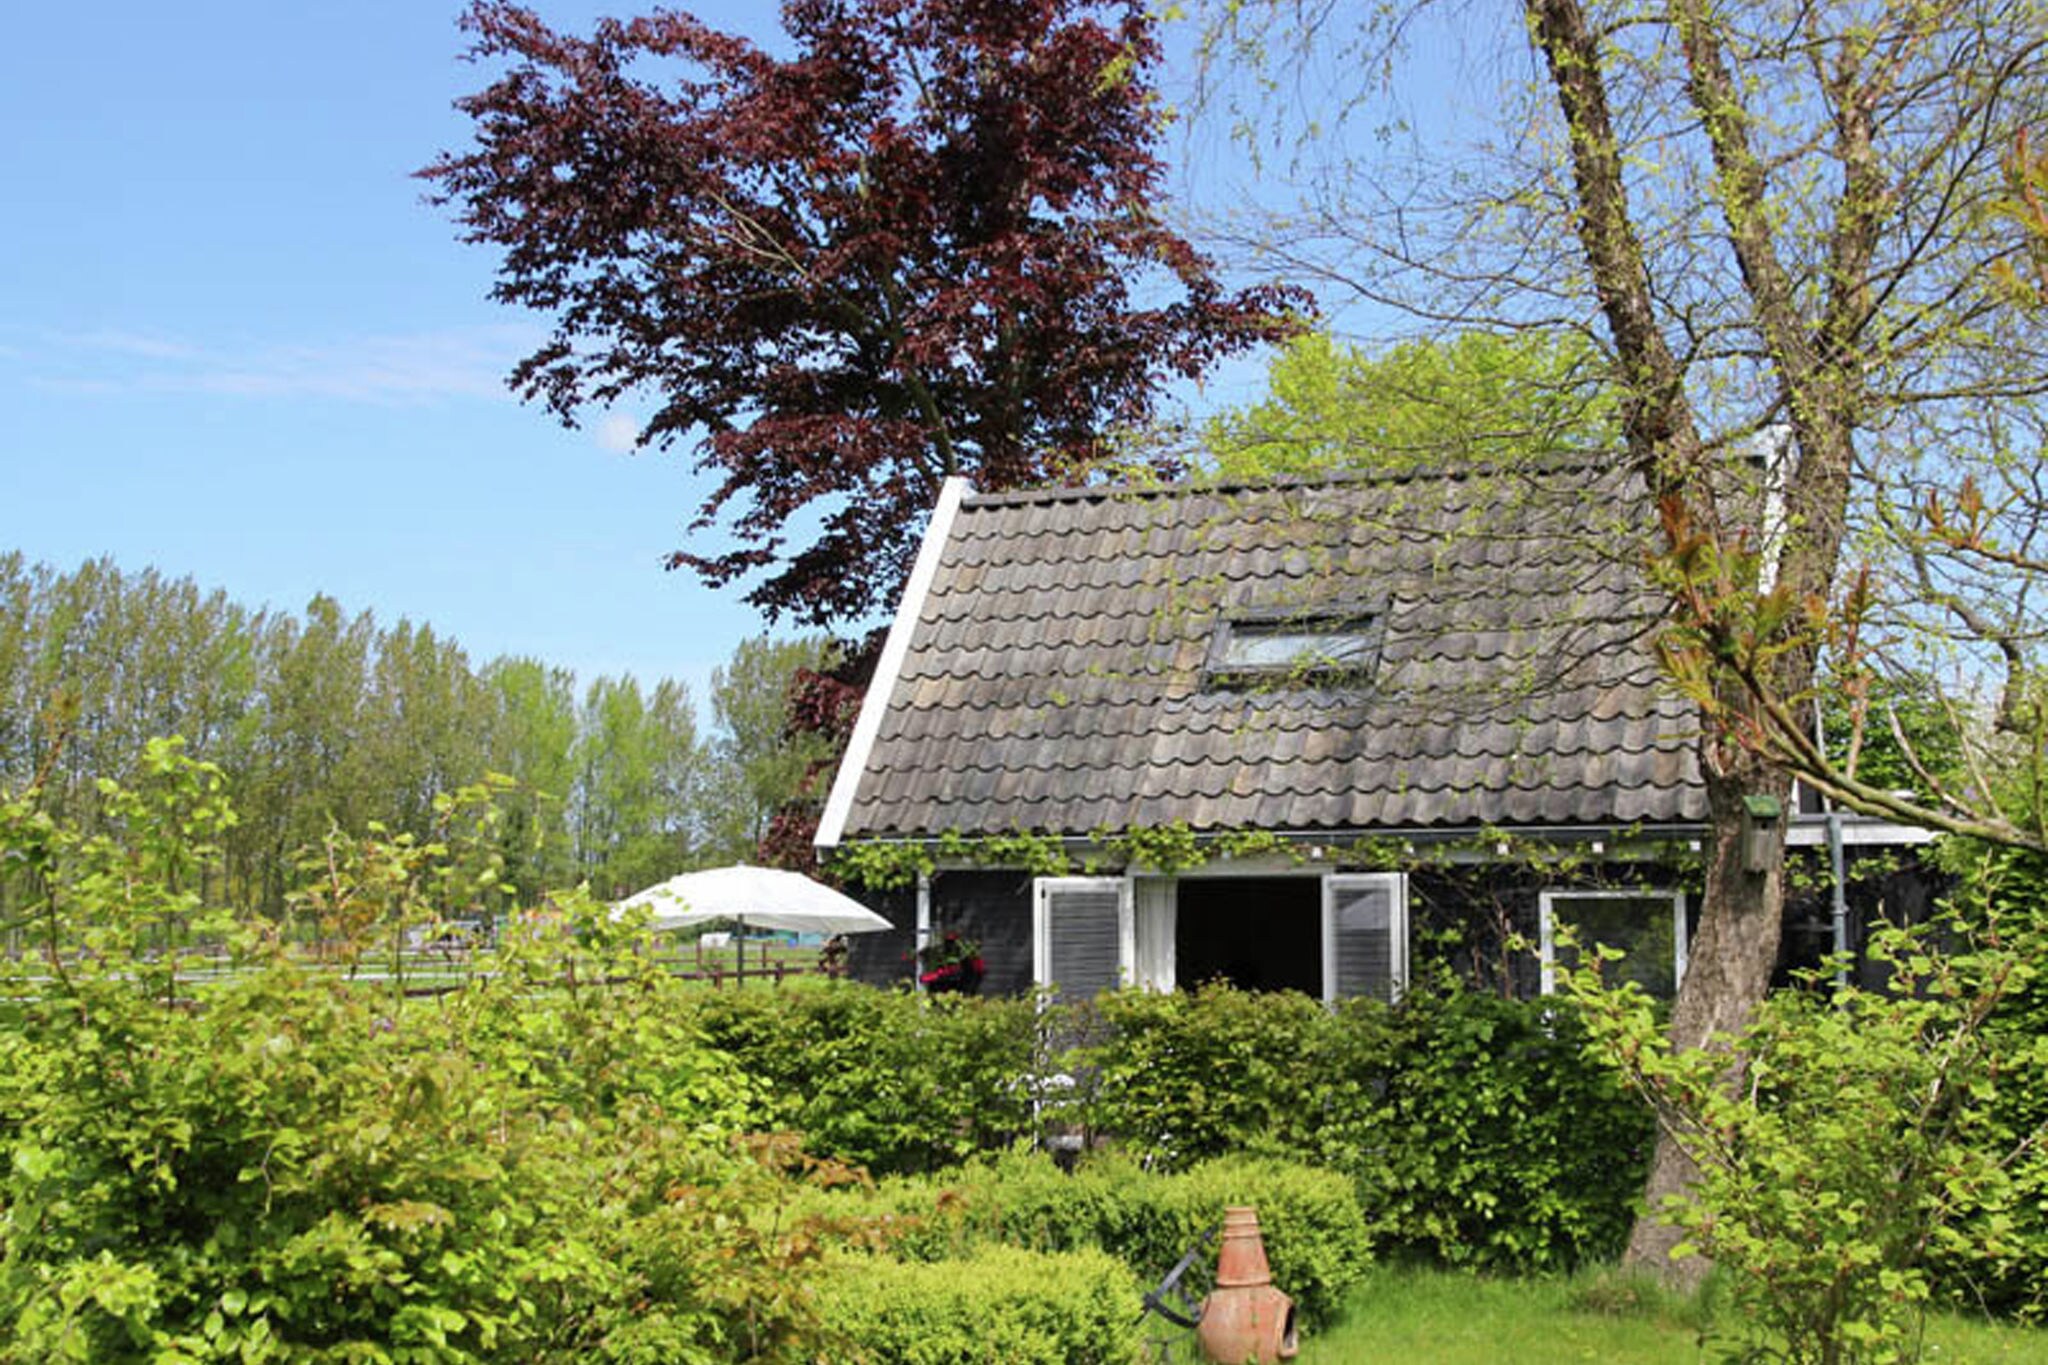 Holiday home for two people at a peaceful, central location in Heiloo near Egmond